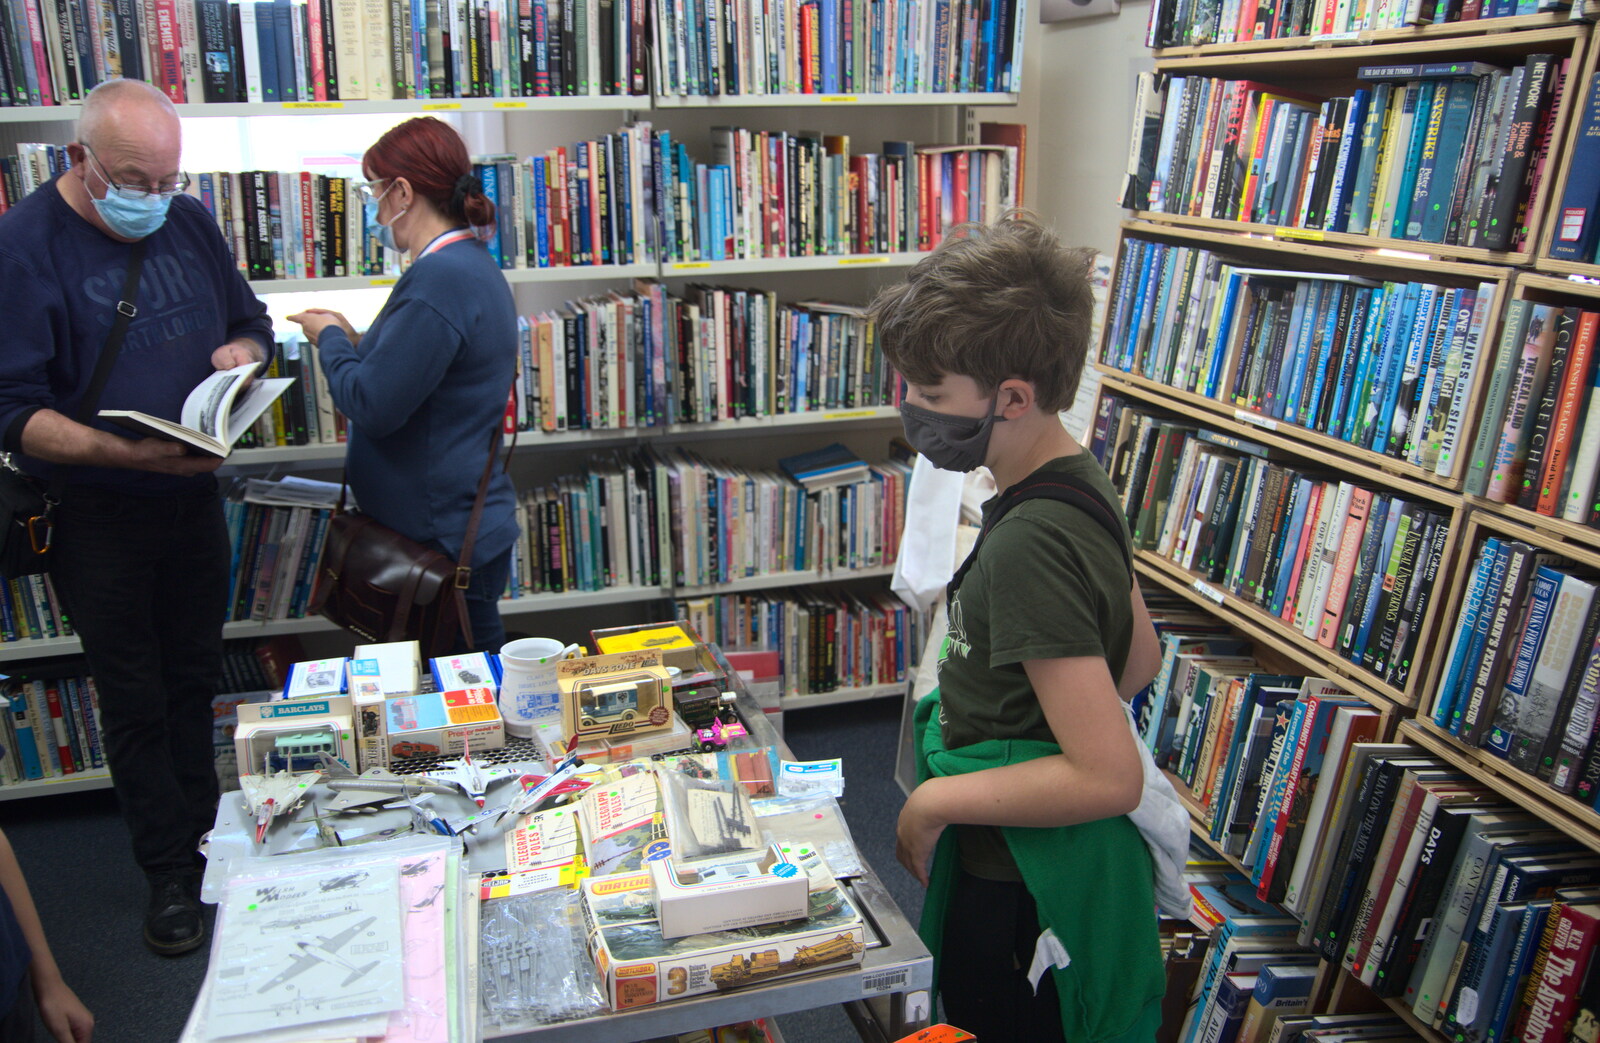 Fred pokes around in a book shop from The Duxford Dash, IWM Duxford, Cambridge - 13th September 2020